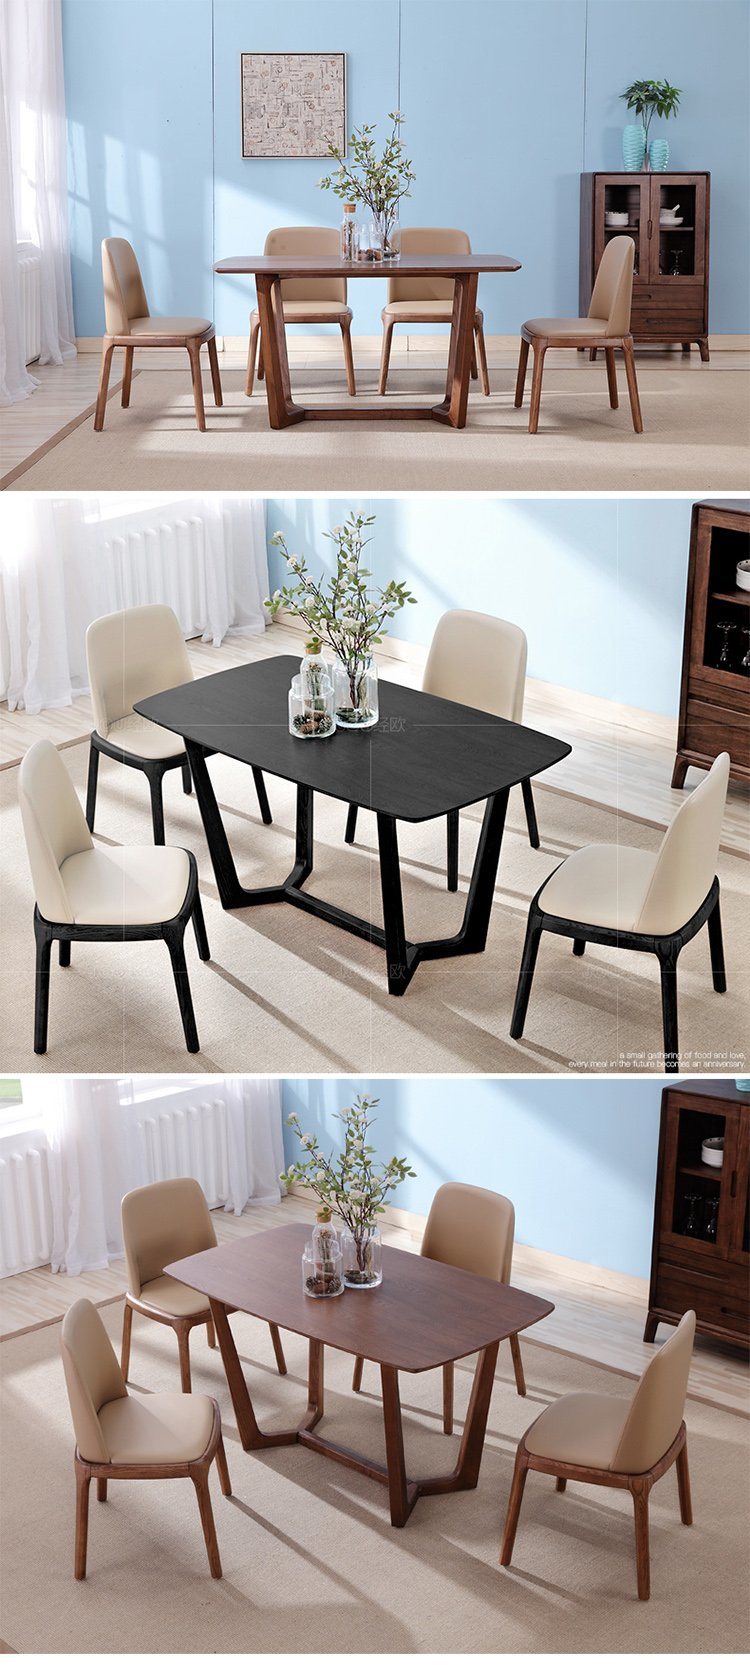 Modern Restaurant Furniture Set Dining Chair and Restaurant Table for Home